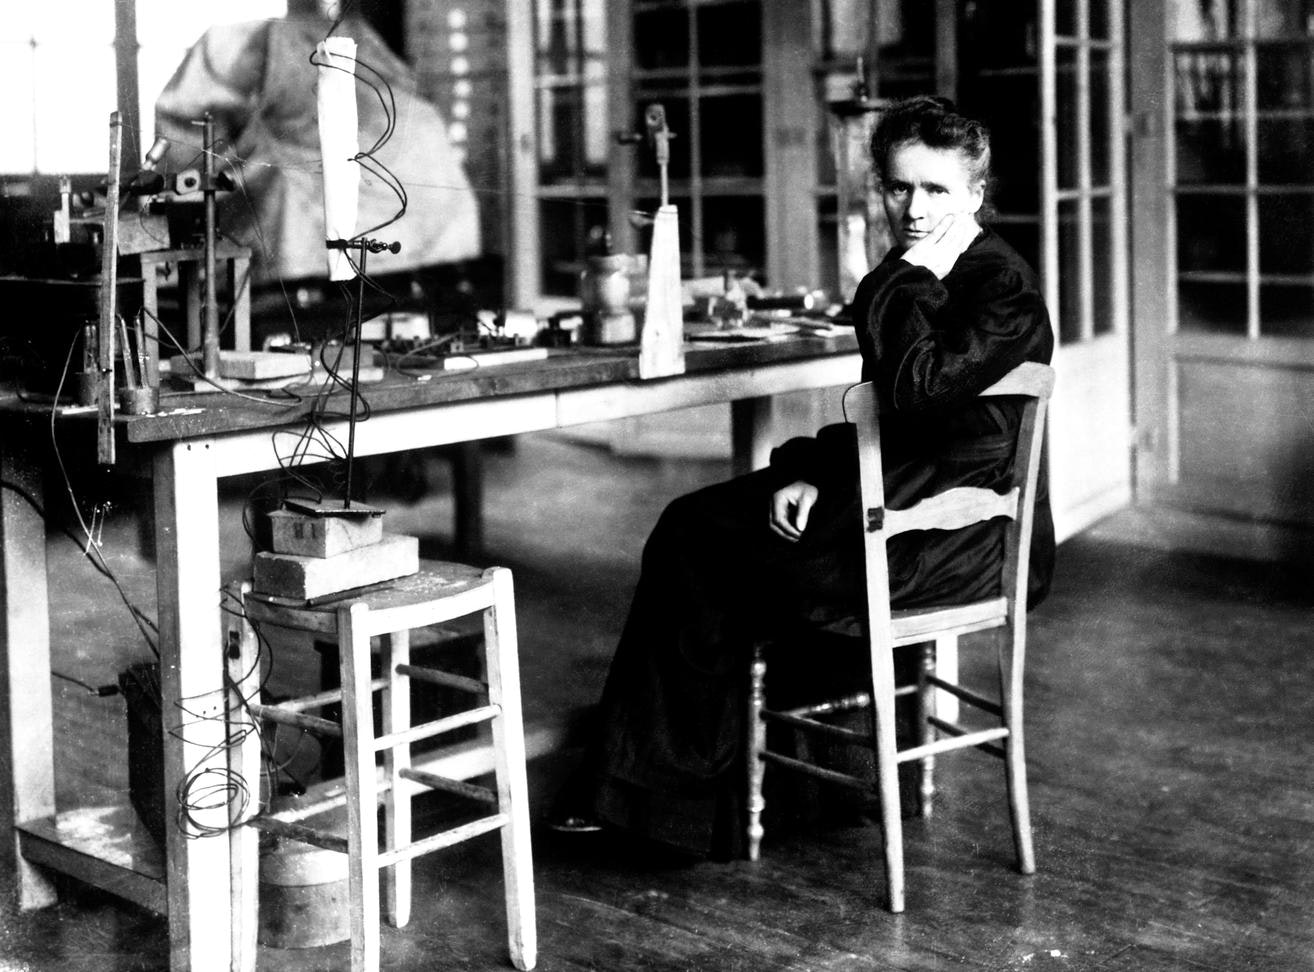 Women are under-represented when it comes to Nobel Prizes. Marie Curie did her bit to even the score – she won two, one for physics and her work with radioactivity and another in chemistry for discovering radium and polonium (Hulton-Deutsch Collection/Corbis)